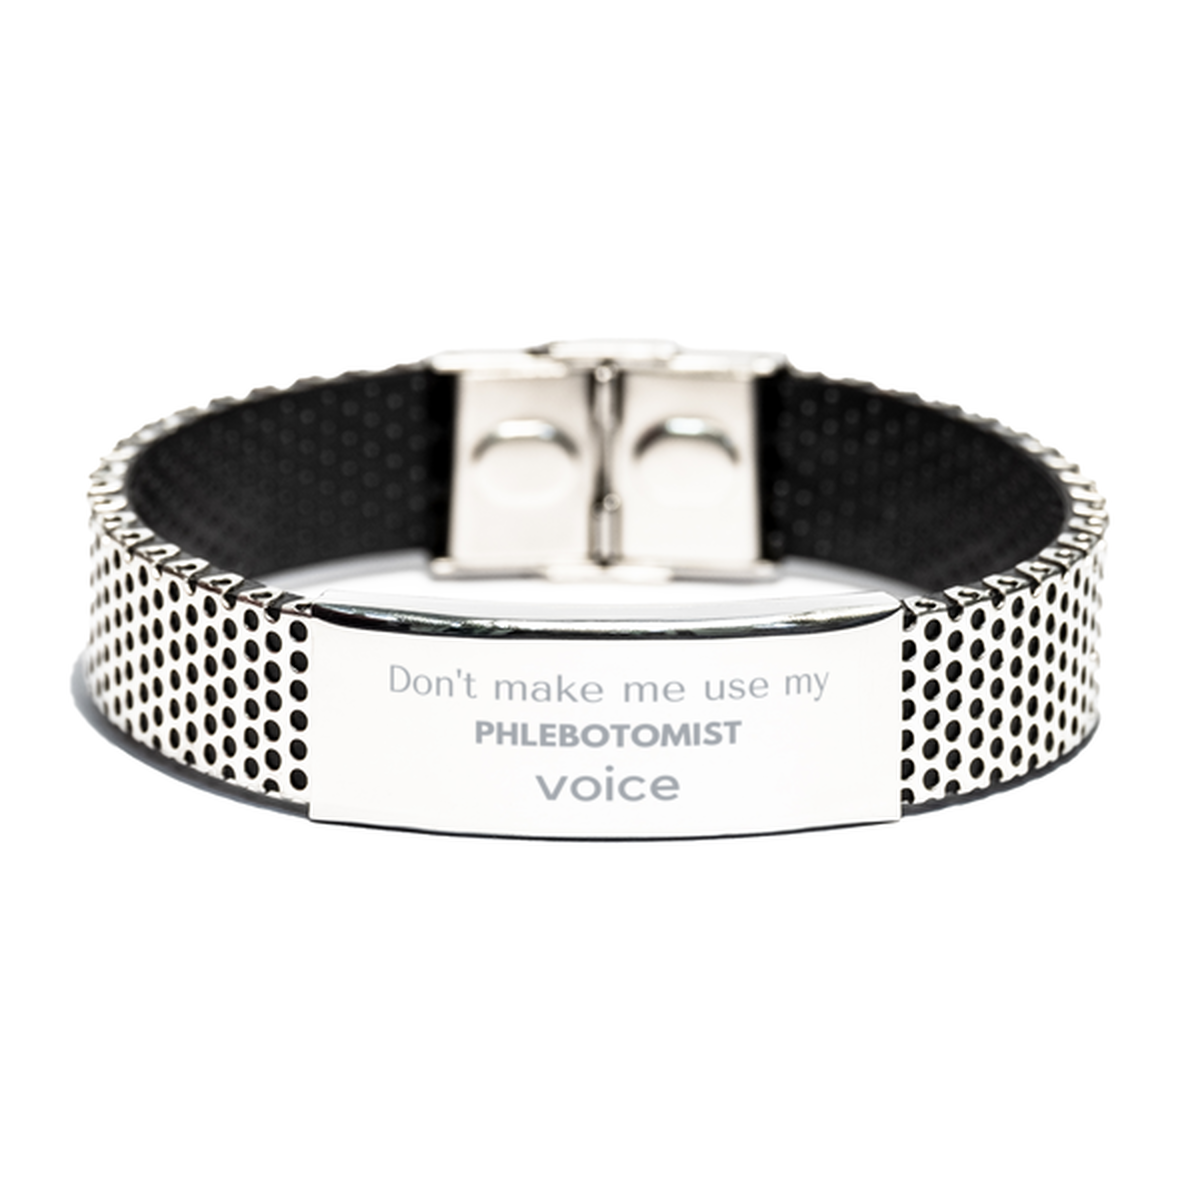 Don't make me use my Phlebotomist voice, Sarcasm Phlebotomist Gifts, Christmas Phlebotomist Stainless Steel Bracelet Birthday Unique Gifts For Phlebotomist Coworkers, Men, Women, Colleague, Friends